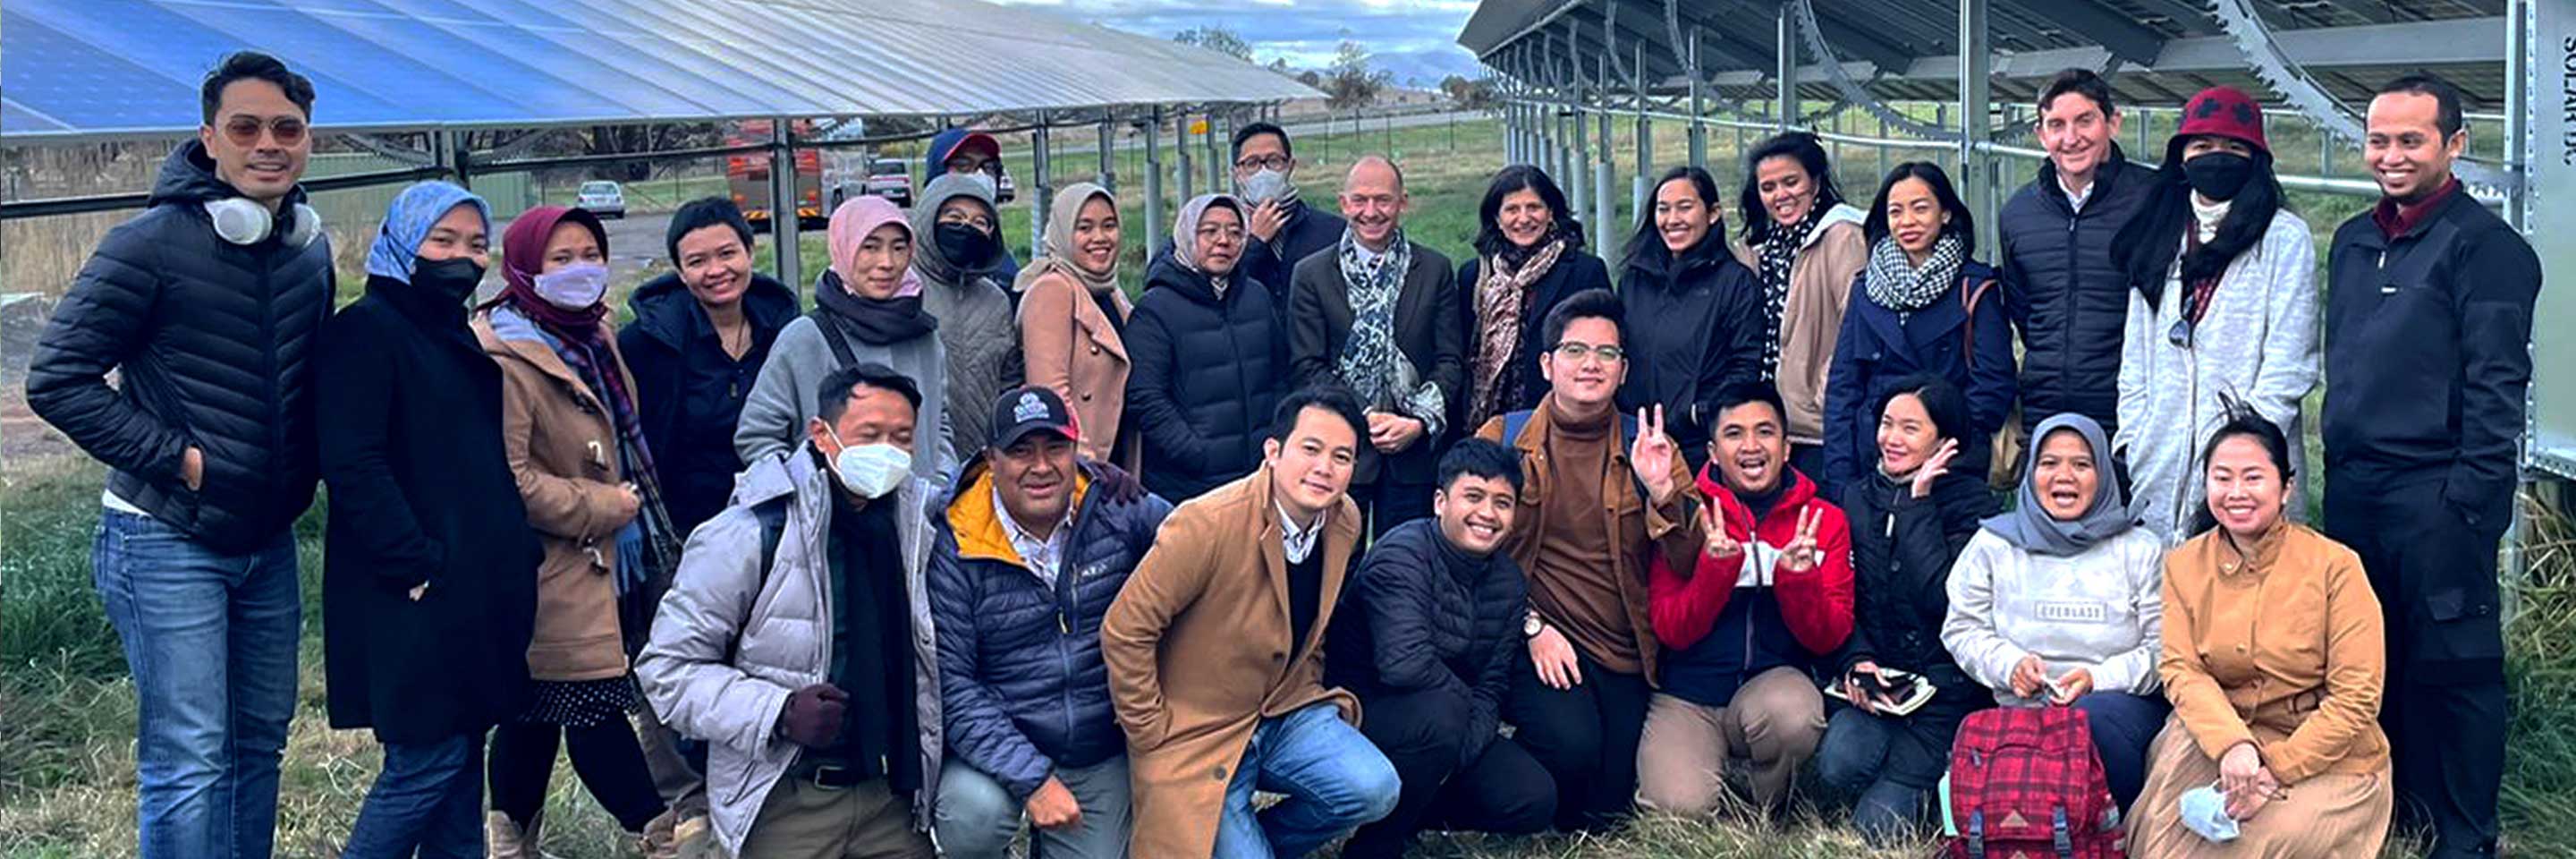 Participants of the Australia Awards Short Course on Climate Finance visit Solar Share in Canberra to learn best practices and lessons from managing a solar farm run by the communities